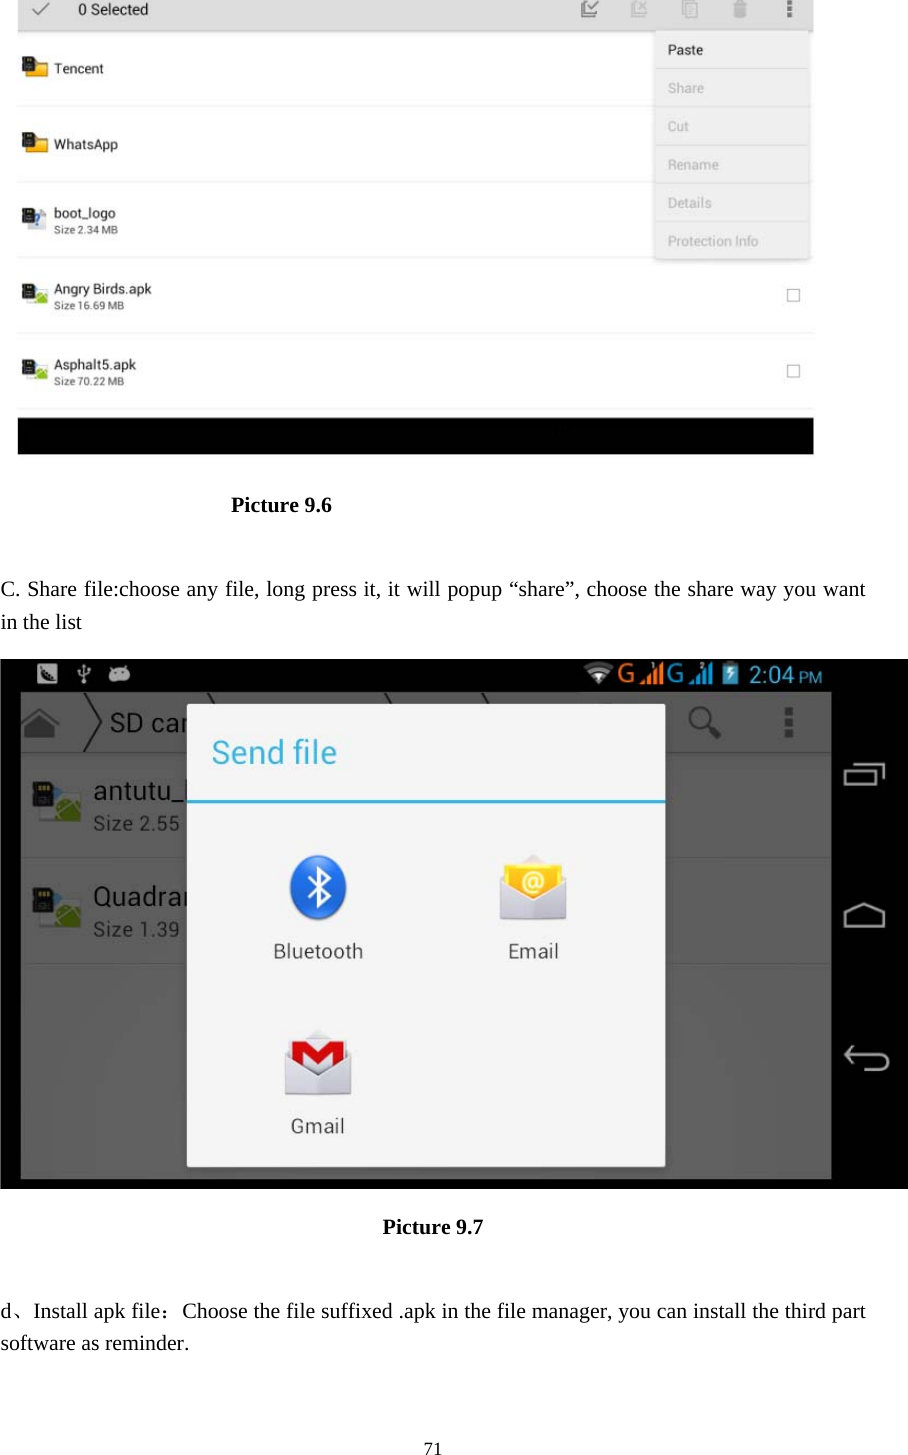     71                      Picture 9.6  C. Share file:choose any file, long press it, it will popup “share”, choose the share way you want in the list  Picture 9.7  d、Install apk file：Choose the file suffixed .apk in the file manager, you can install the third part software as reminder. 